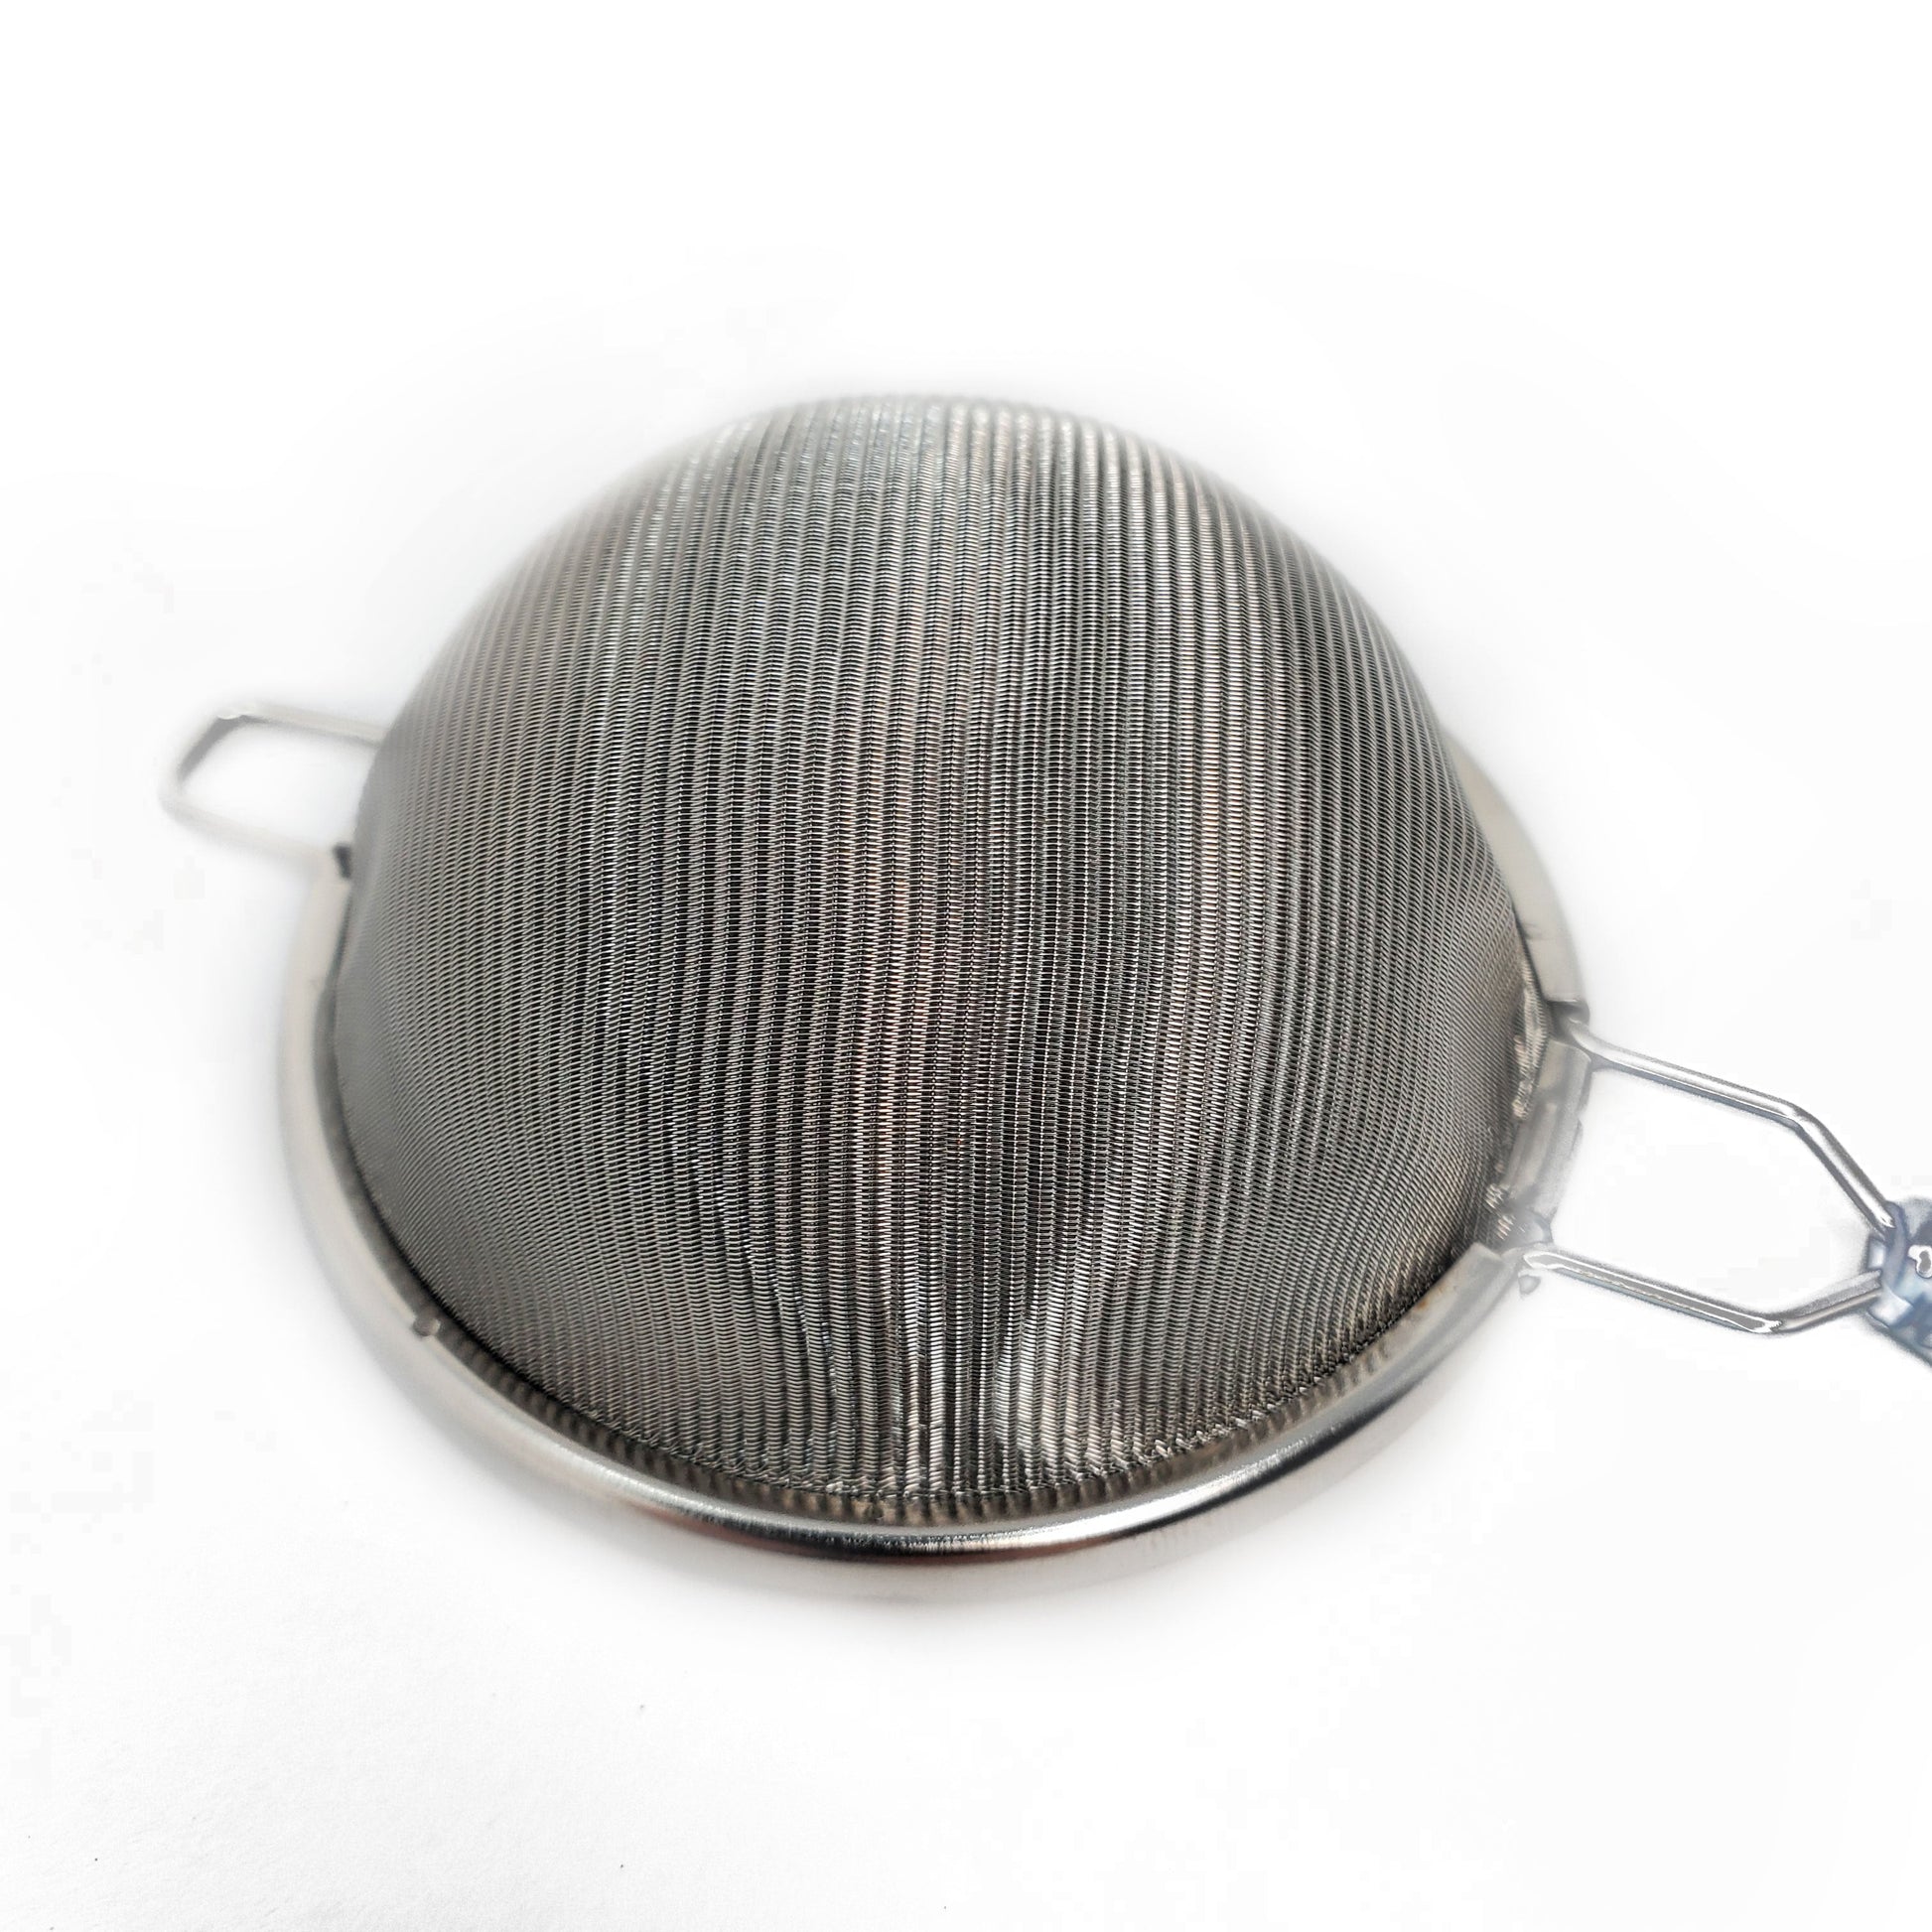 Superfine Gongfu Tea Strainer by Tea and Whisk - Lotus and Willow